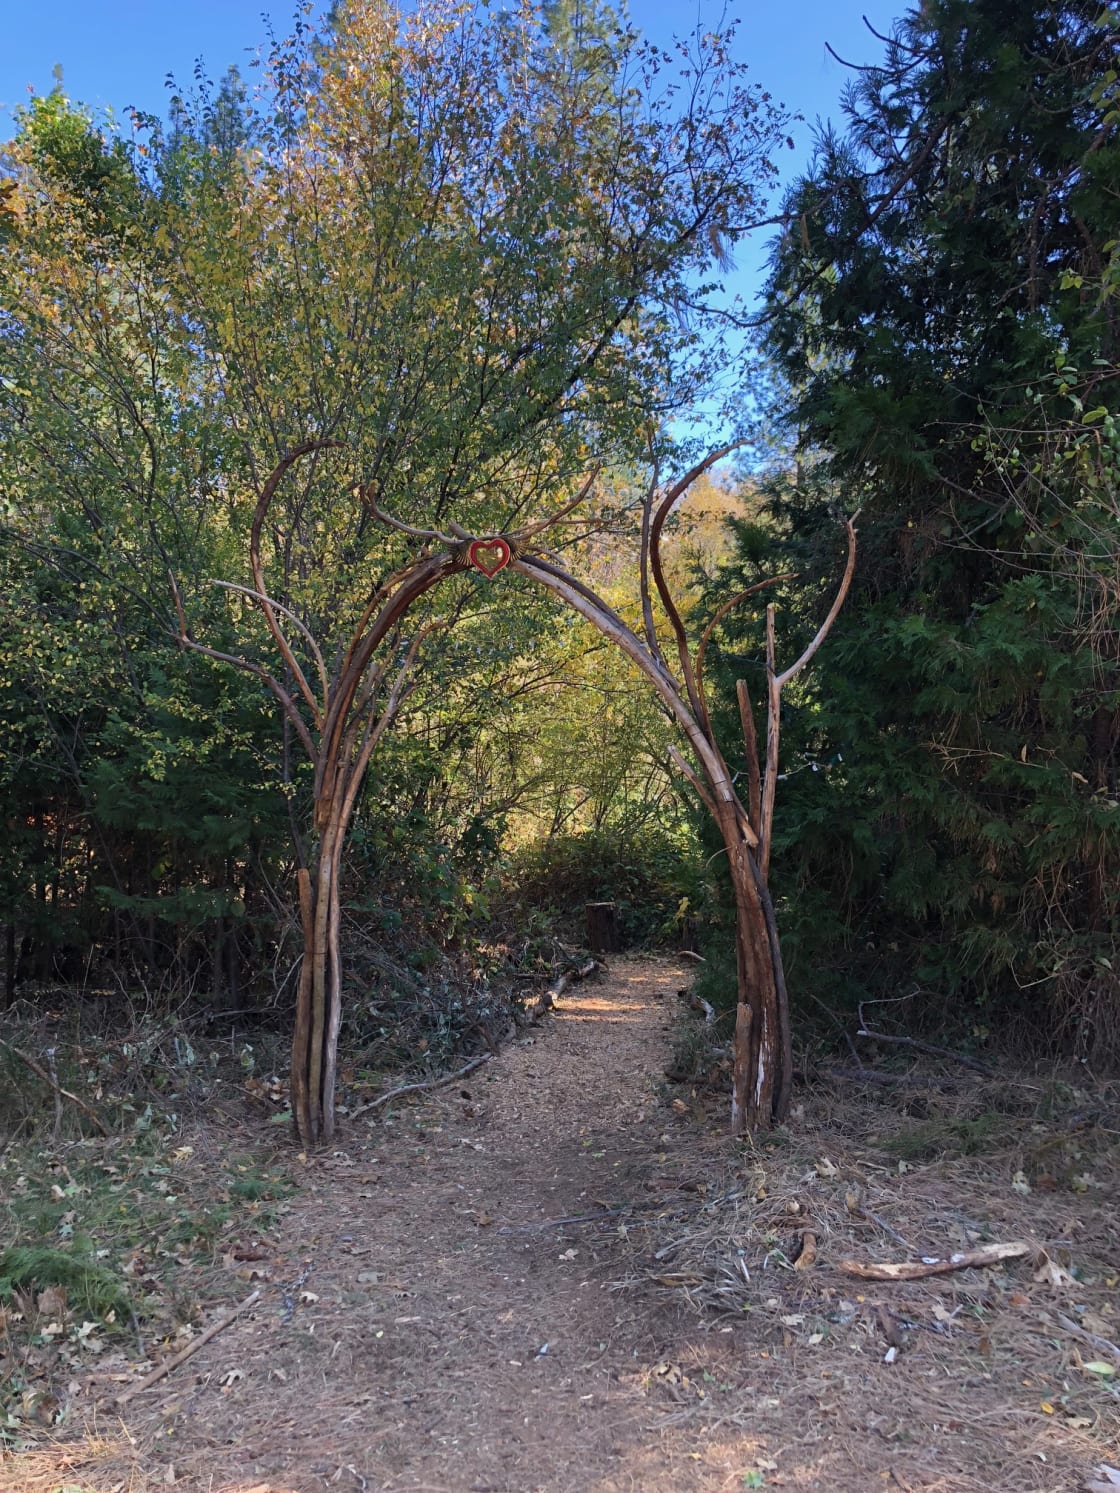 Archway marking path to campsite